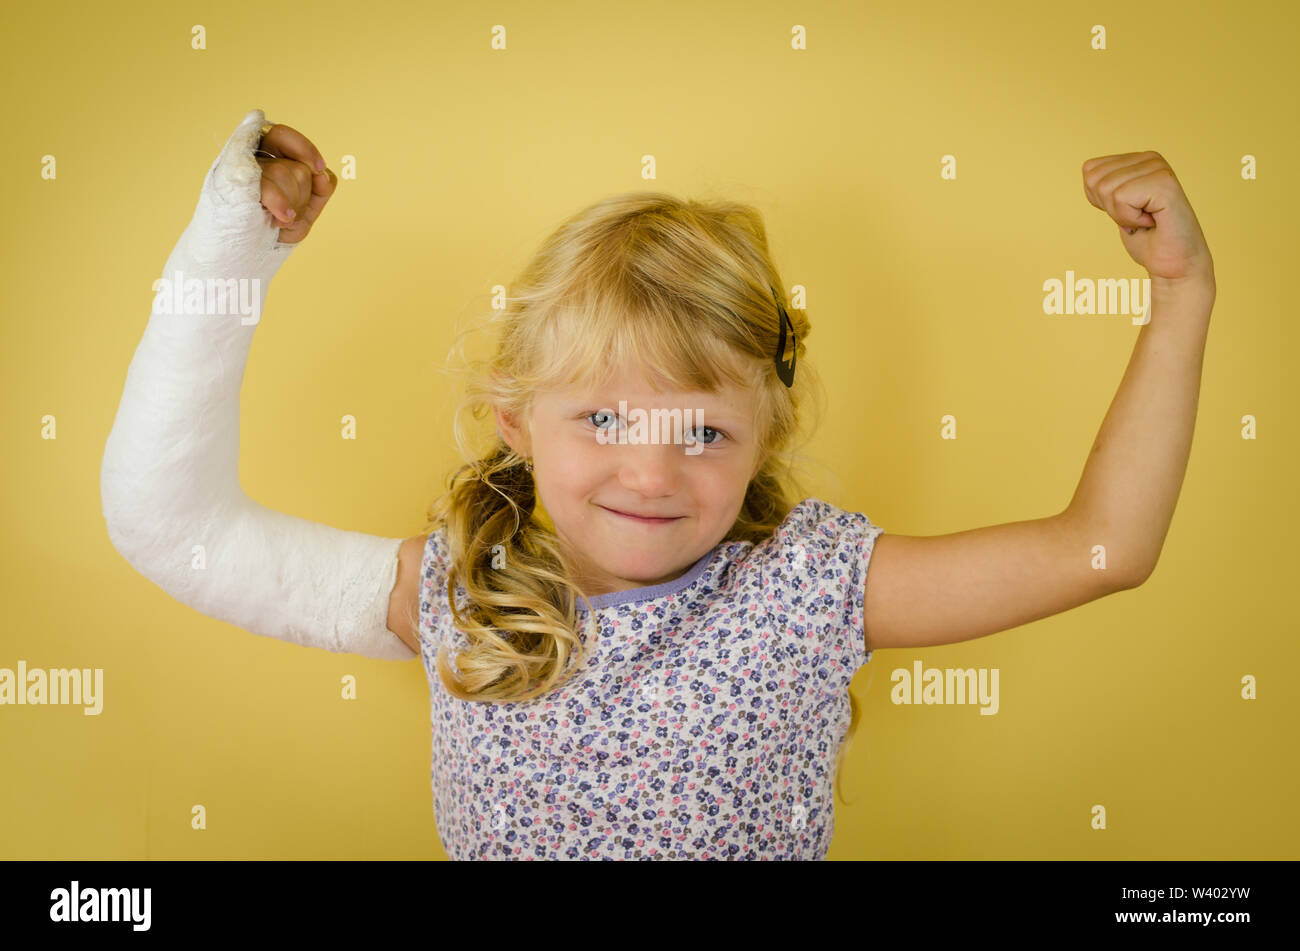 hurt blond girl with broken hand doing sport gesture of strength and triumph Stock Photo